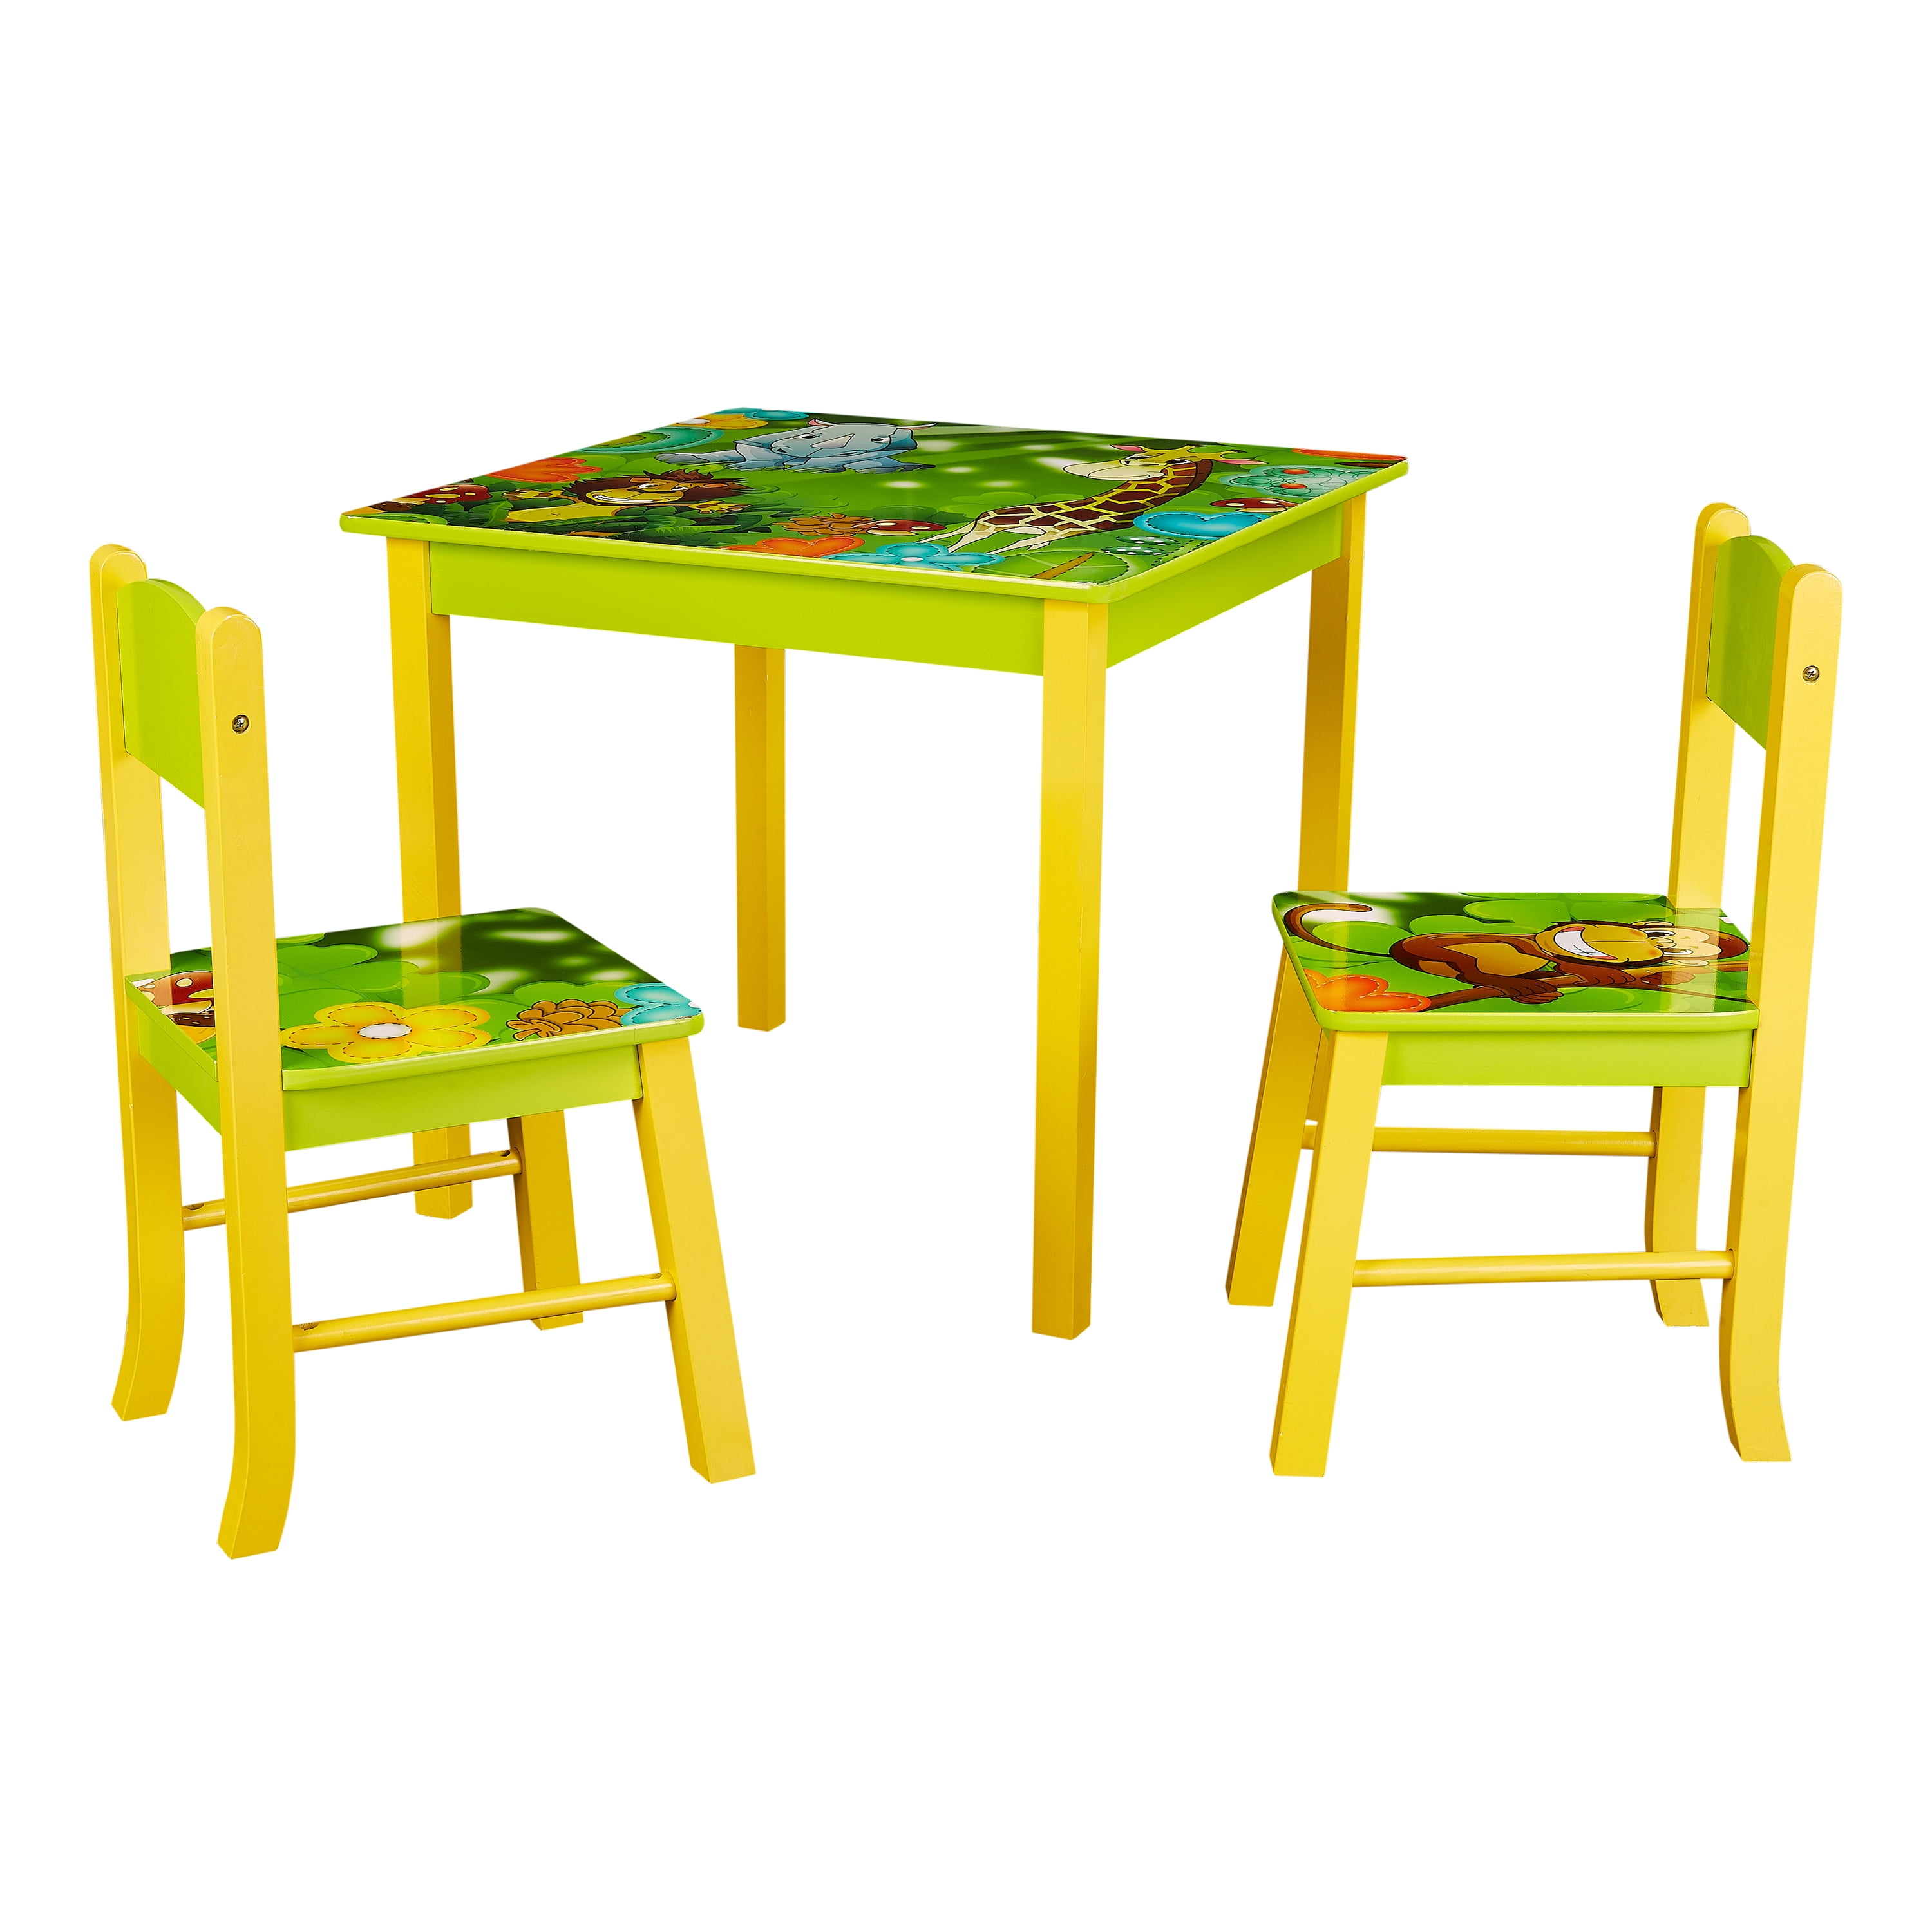 Wooden Table & 2 Chairs Set With The Theme Of Jungle Friends Ideal For Kids 